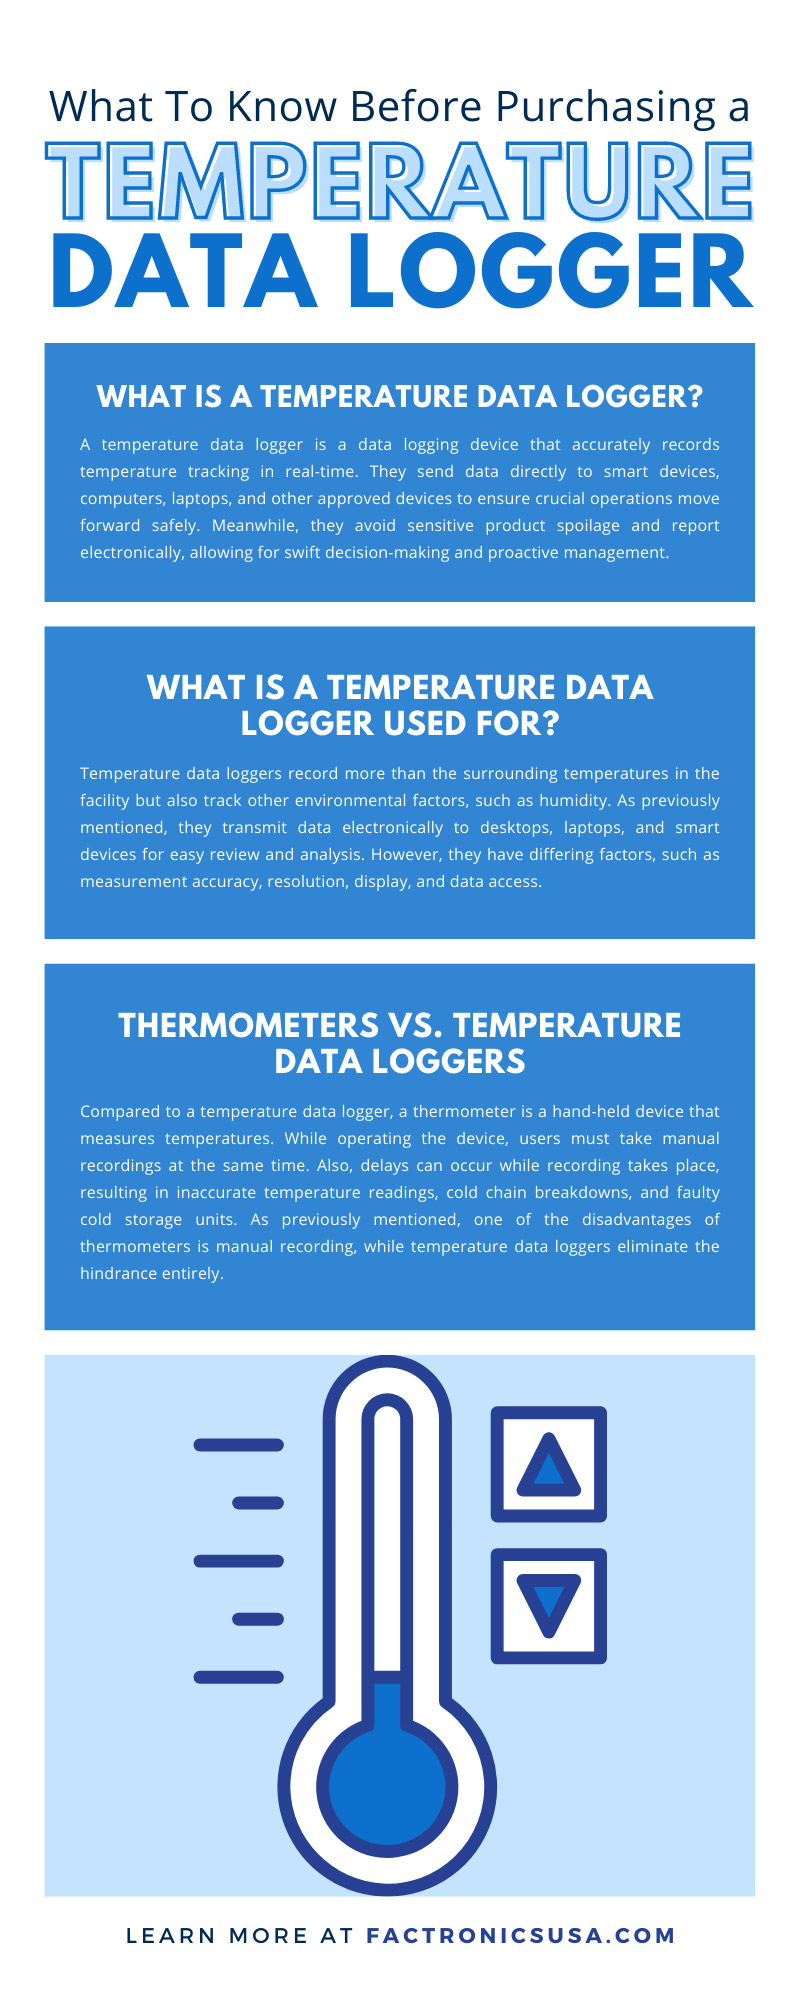 What To Know Before Purchasing a Temperature Data Logger